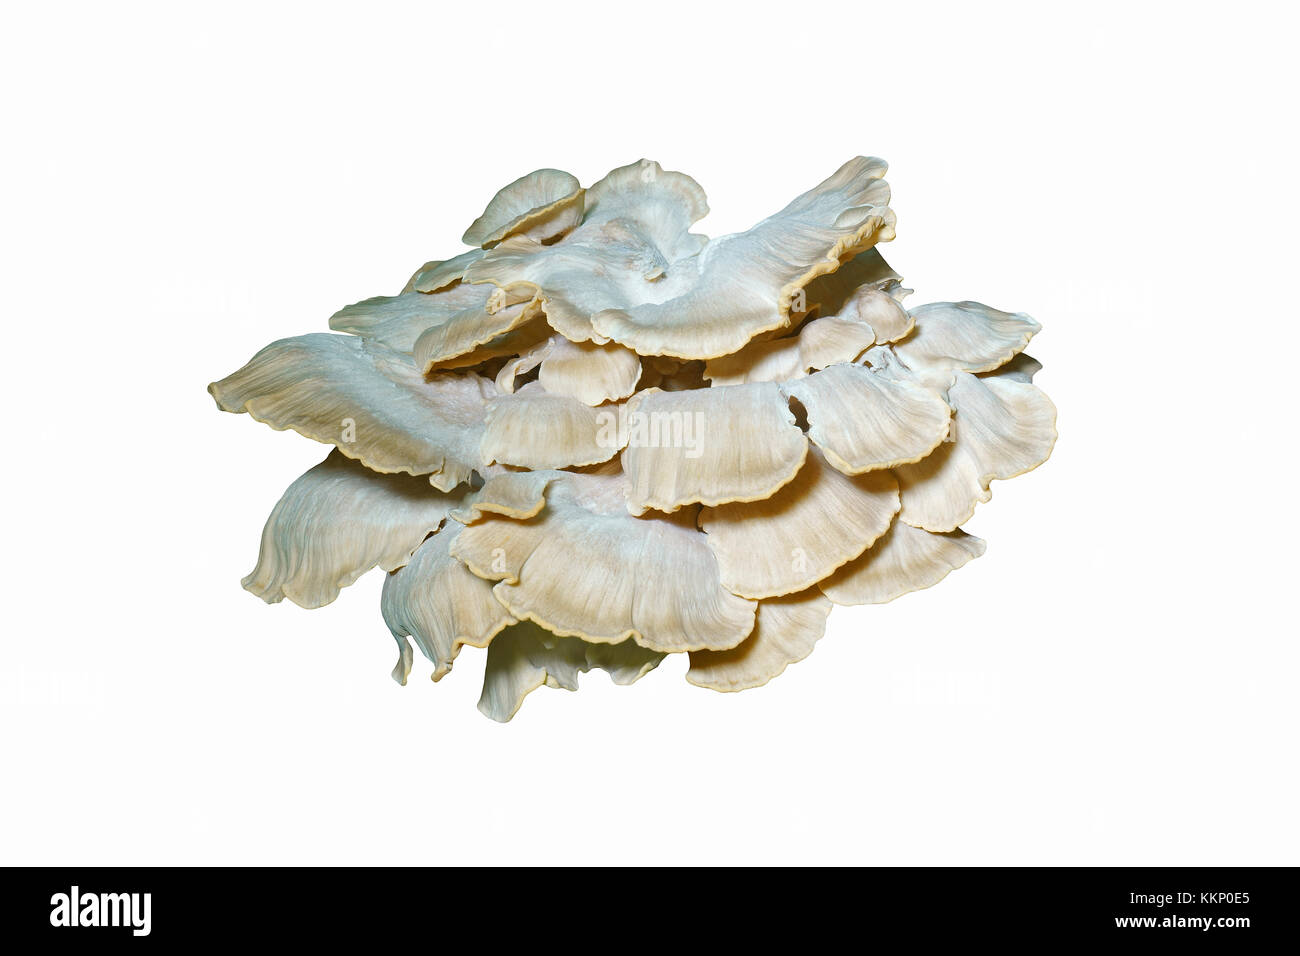 Giant polypore (Meripilus sumstinei). Called Black staining polypore also. Synonym: Grifolia sumstinei. Image of fungus isolated on white background Stock Photo